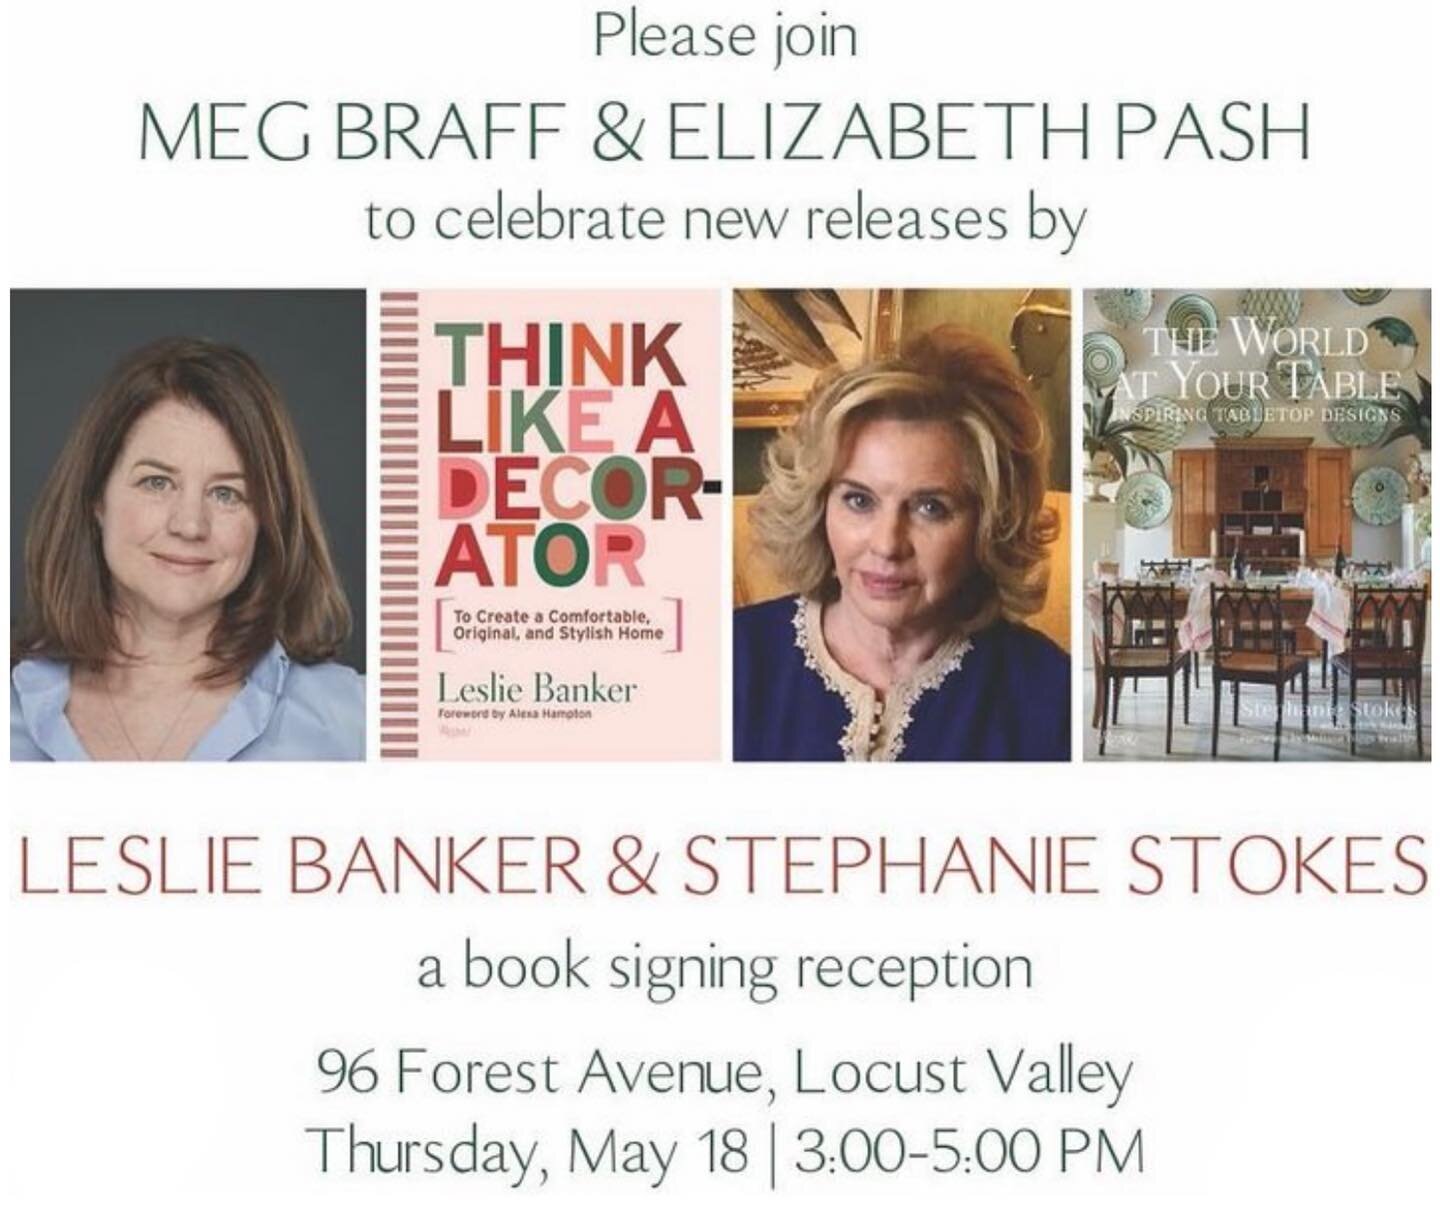 Join DC President @elizabethpash and DC member @megbraffdesigns on Thursday, May 18th, to celebrate new releases by DC members @lesliebanker and @sstokesnyc. 

The book signing reception is this Thursday, May 18th from 3:00 - 5:00 at 96 Forest Avenue